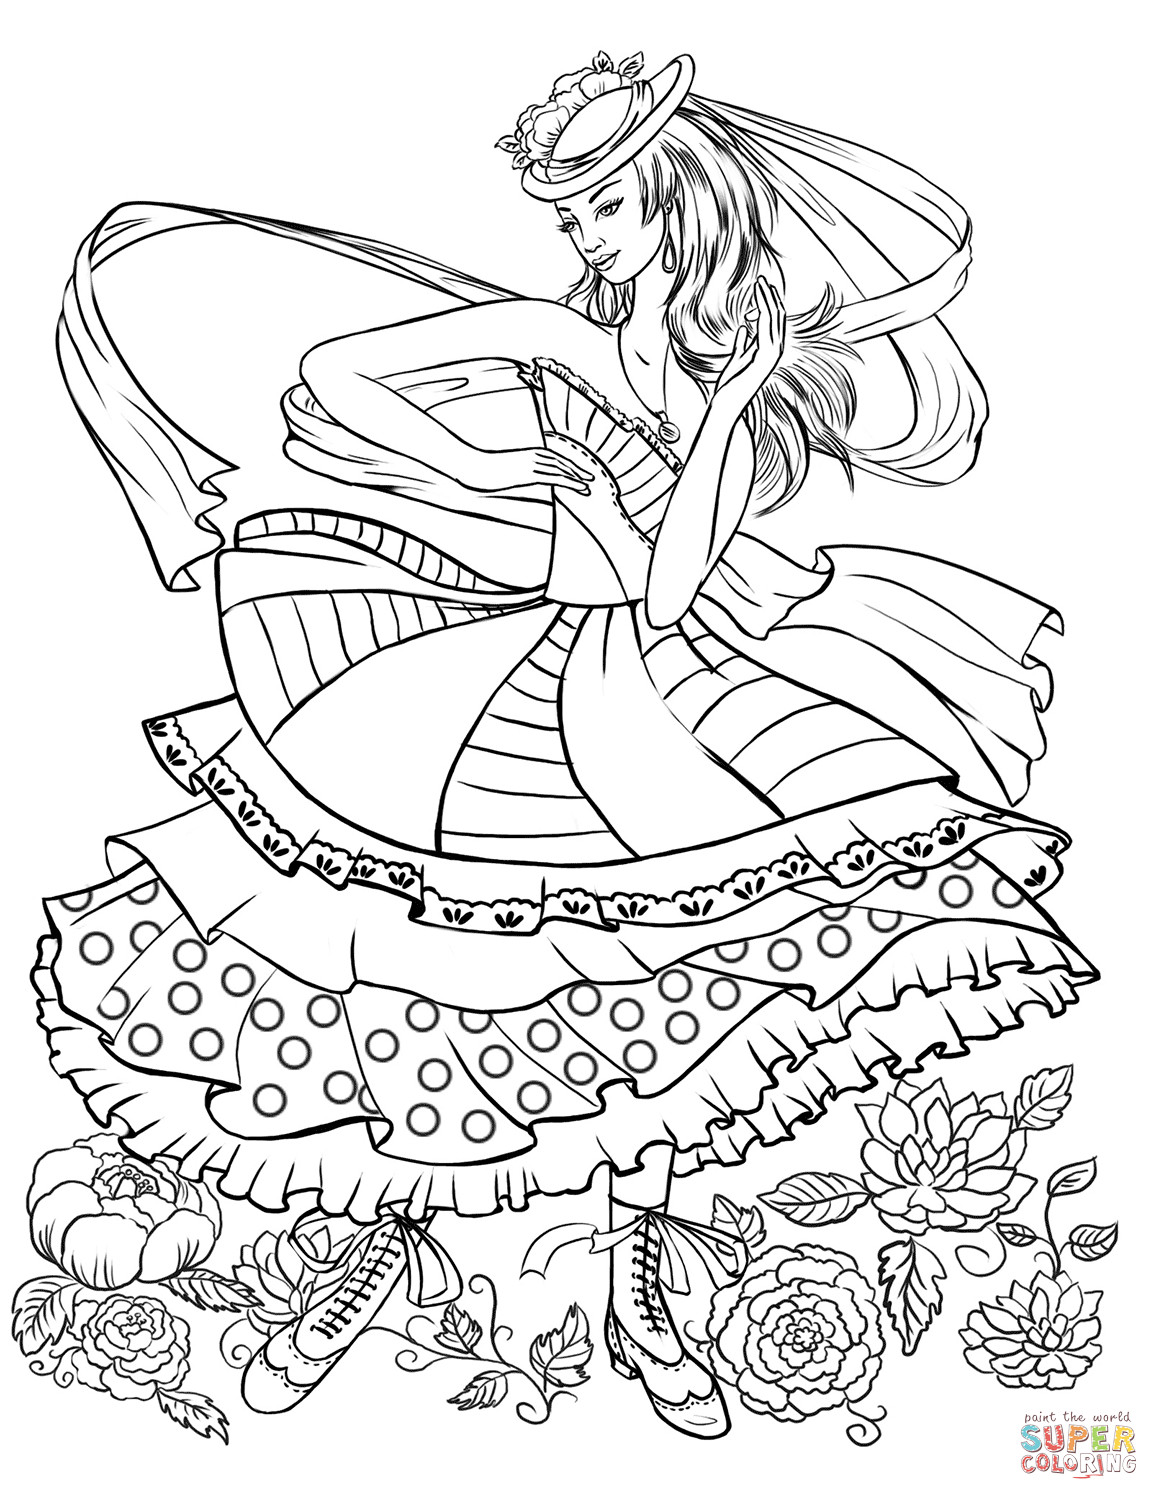 Fashion Coloring Pages For Girls
 Girl Dancing in a Vintage Fashion Clothing coloring page